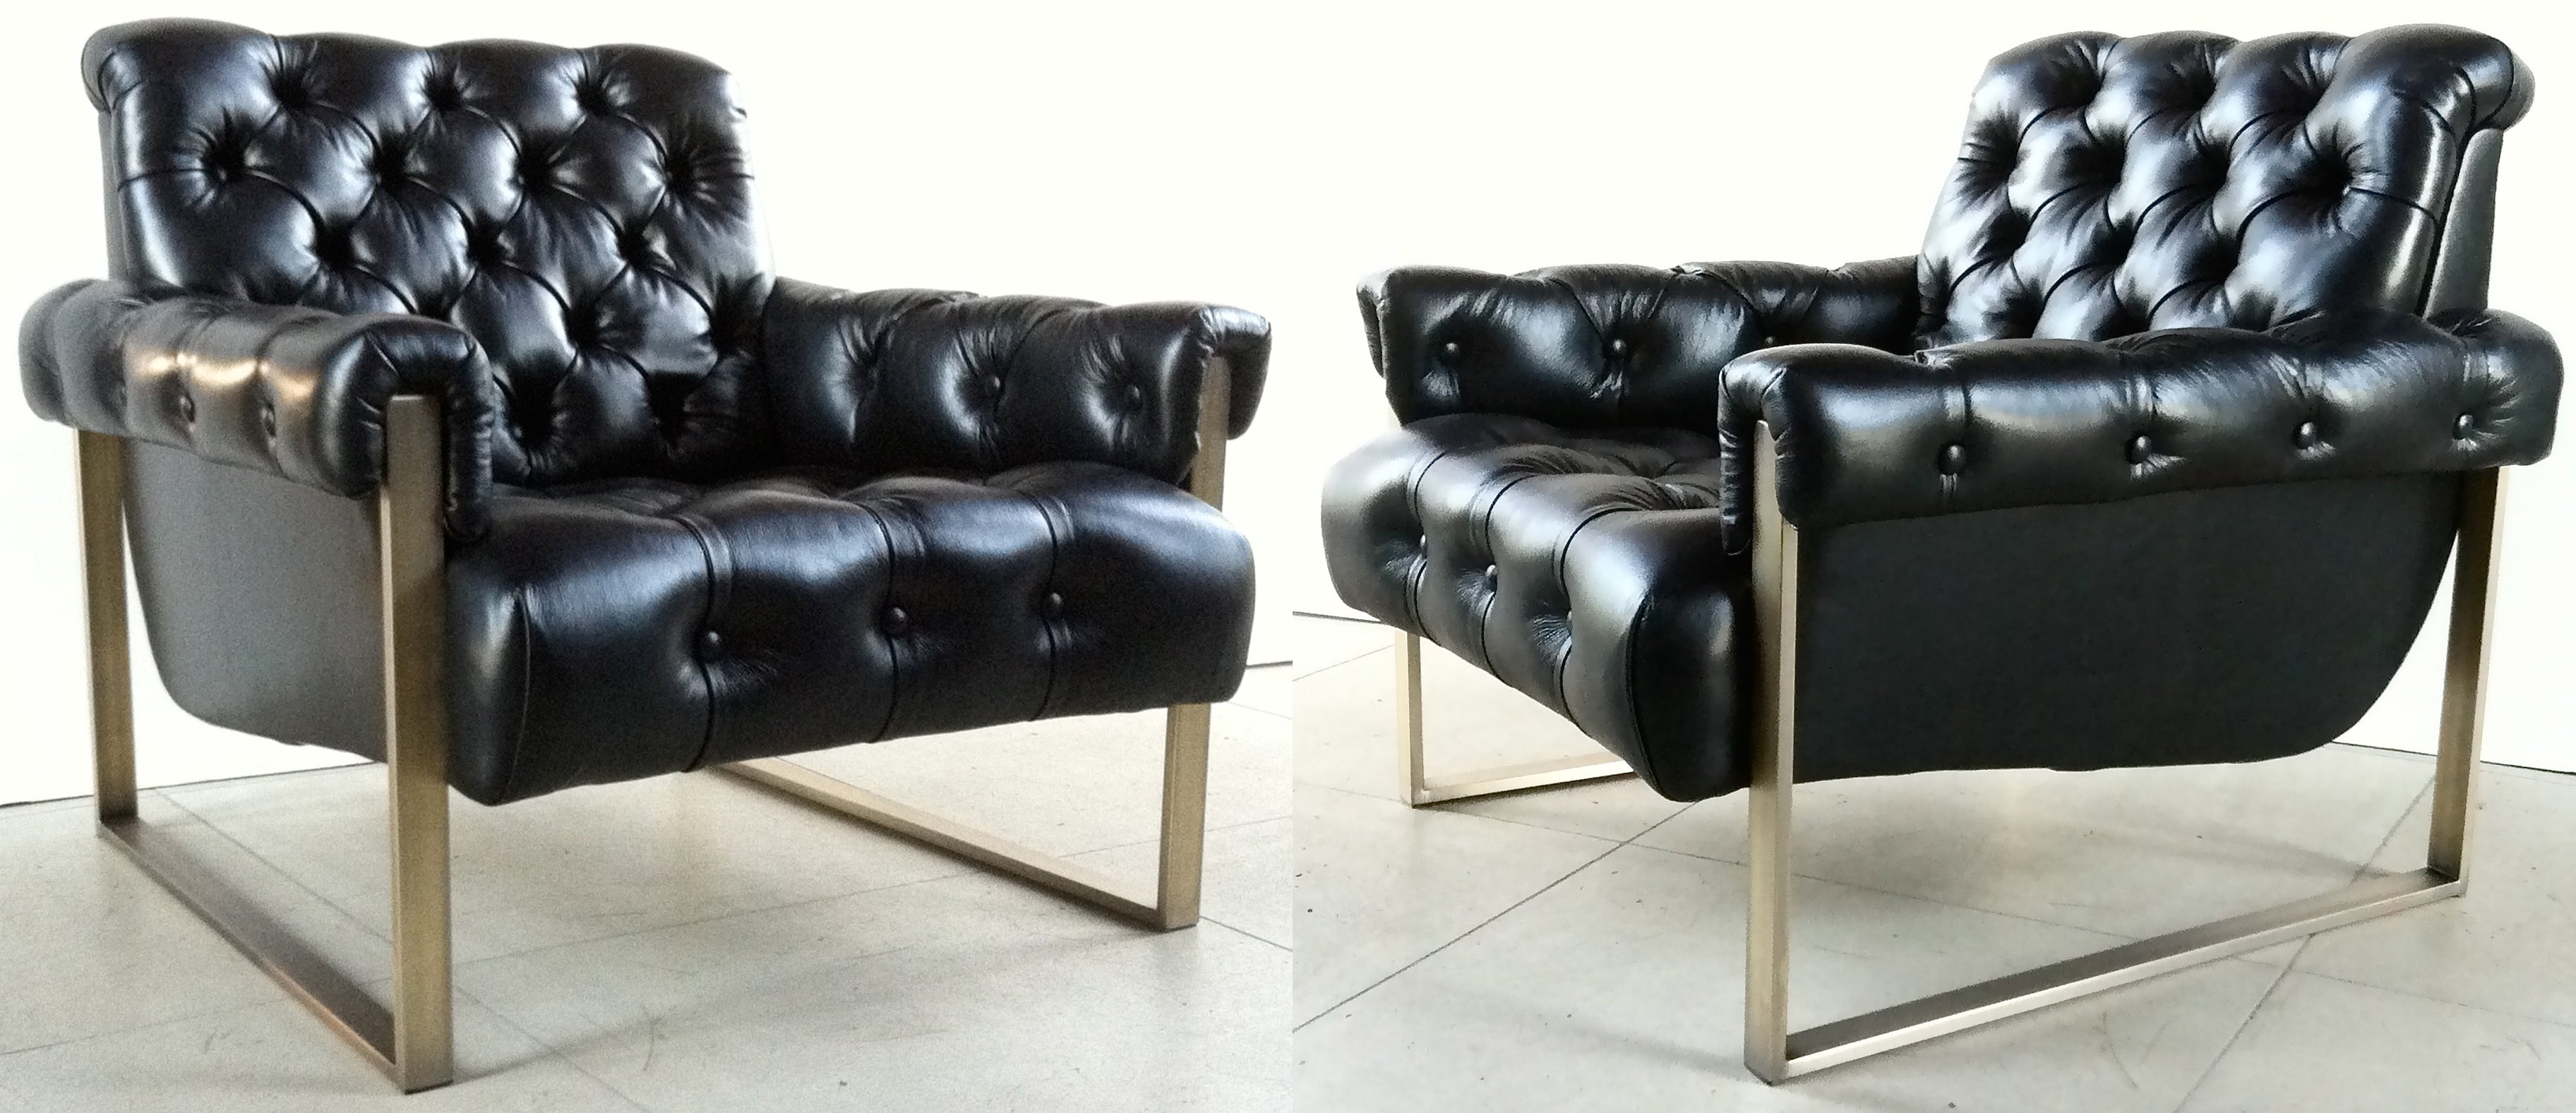 Pair of Milo Baughman Bronze Tufted Leather Arm Chairs For Sale